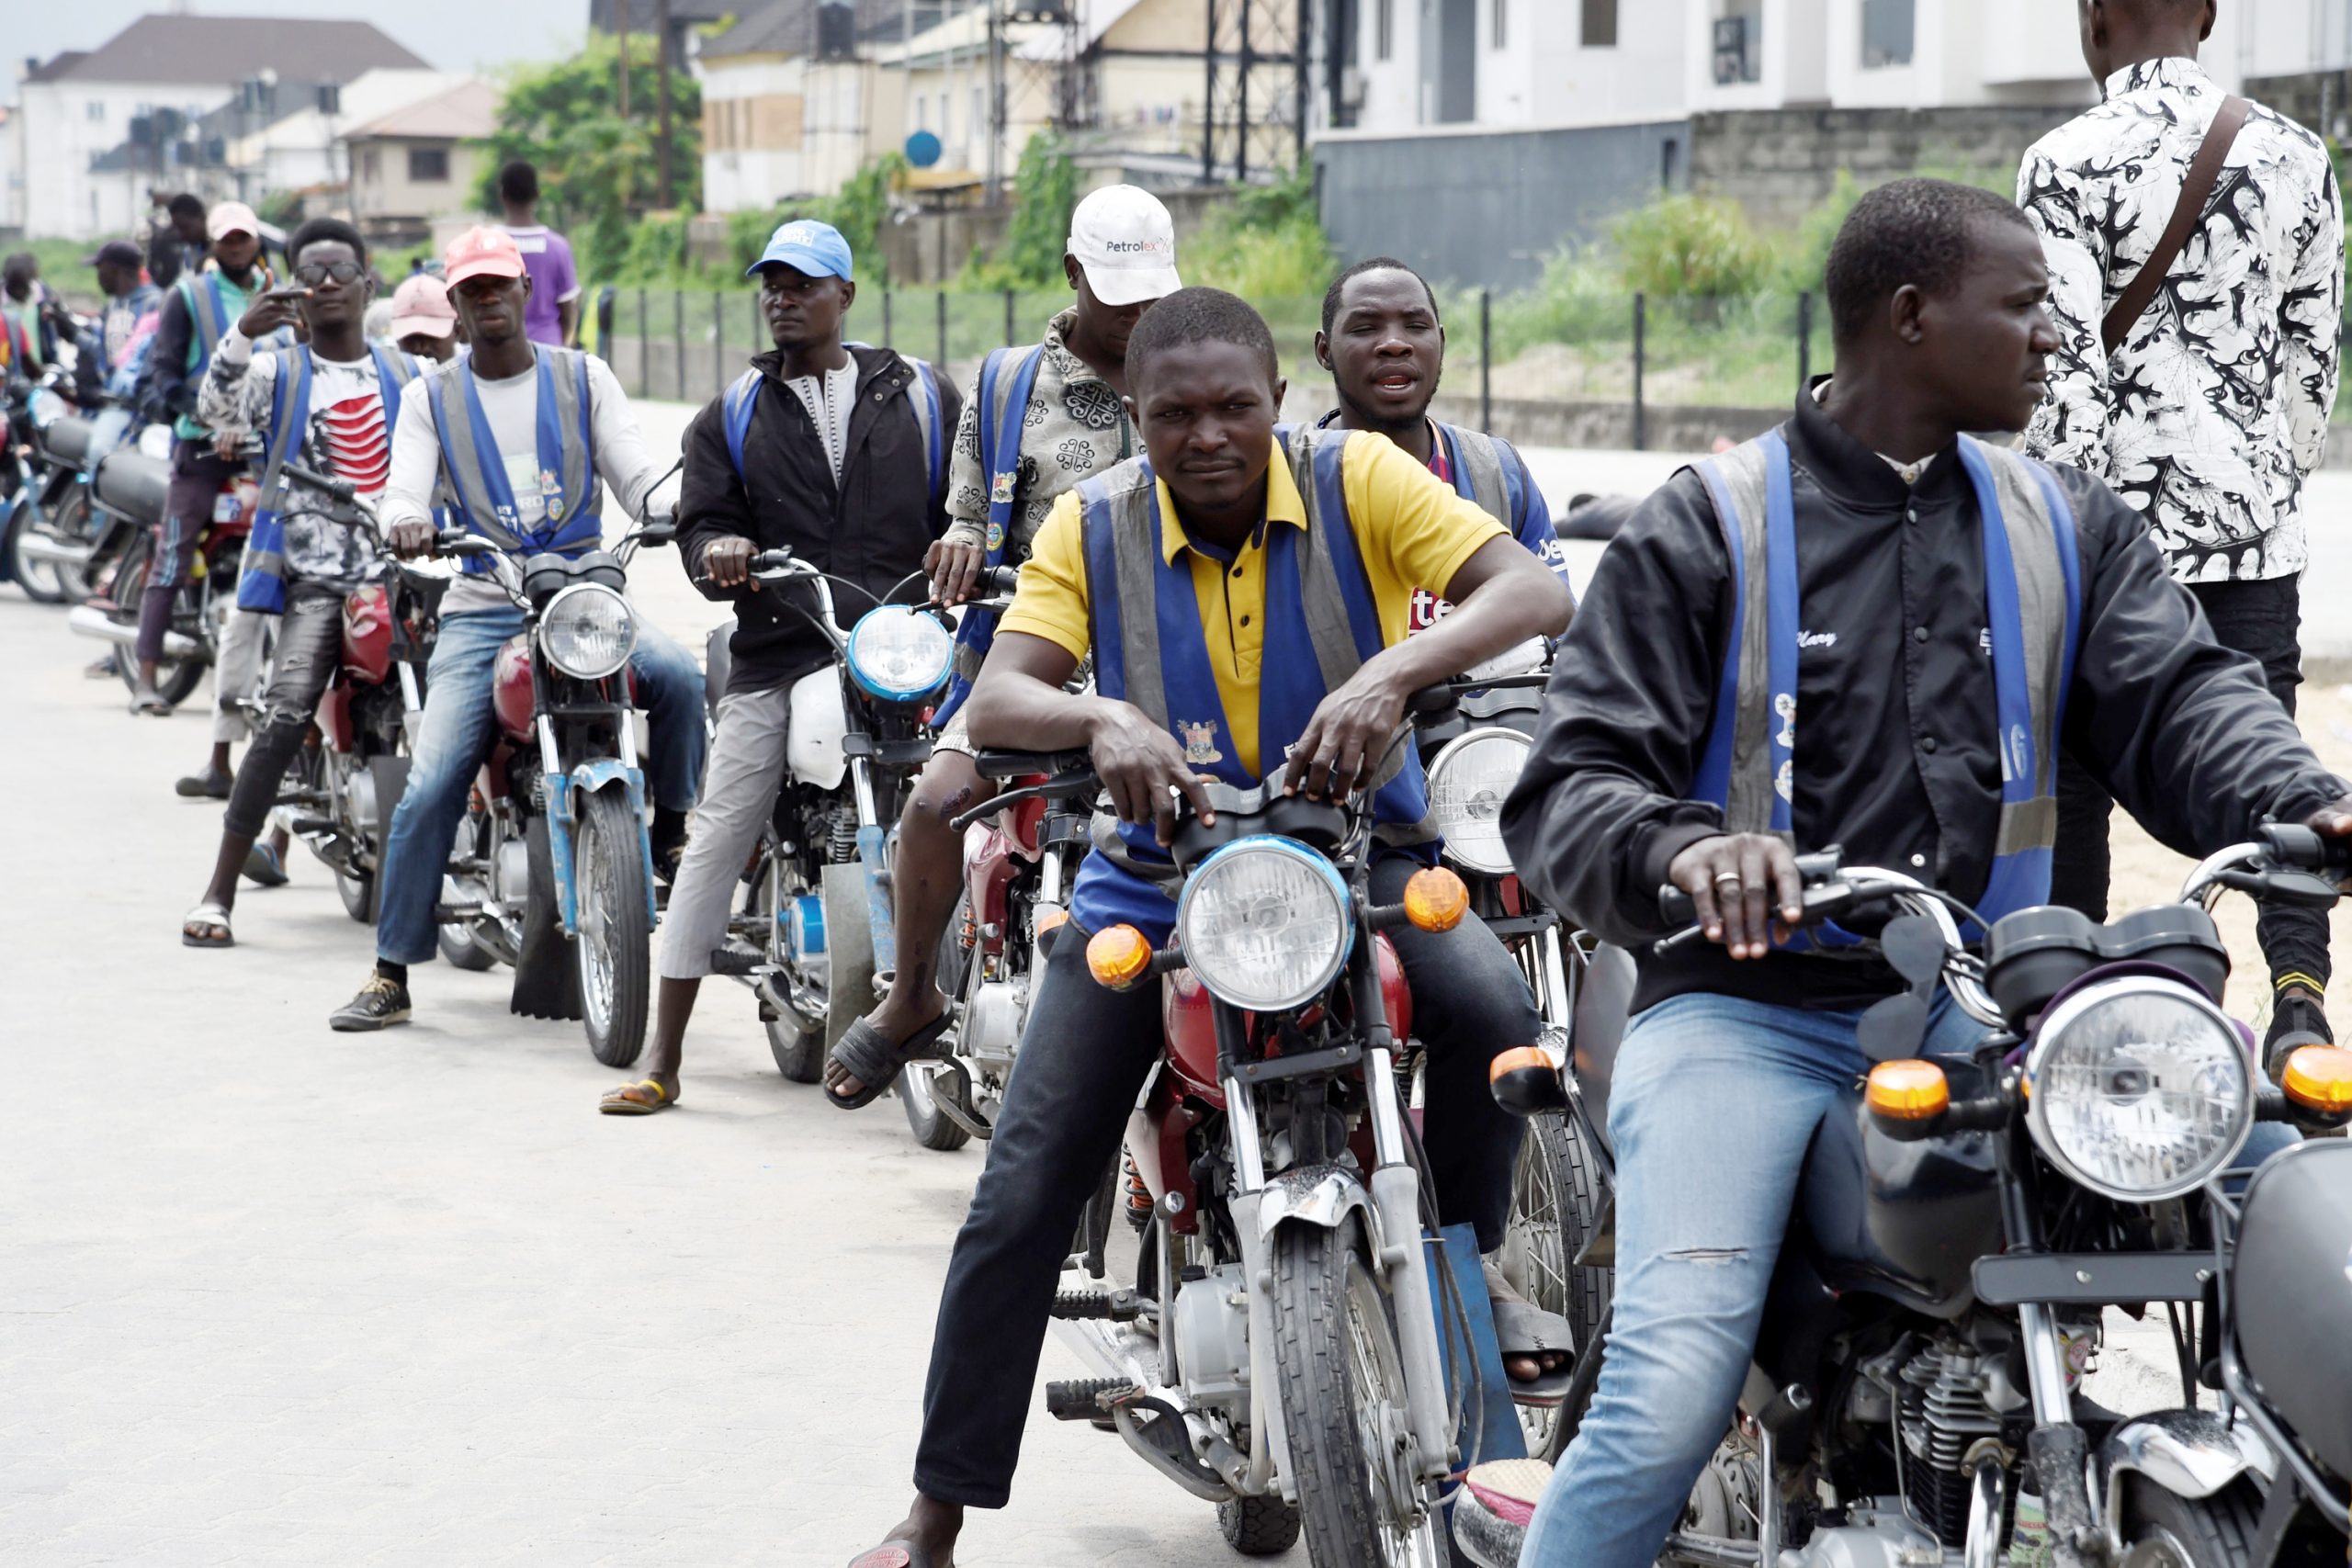 Regular motorcycle taxis queue for passengers without helmet or kits for safety unlike Uber-style branded motorbike taxis in Lagos, on September 4, 2019. - A growing number of ride hailing services have stepped into the chaos -- bringing order to the "okada" motorbike taxis that have long whizzed perilously around Lagos. Before the systems launched, Lagosians in a hurry had to put their faith in the army of unregulated "okada" riders weaving hazardously through the traffic. But with the emergence of the Uber-style motorbike taxis, motorists often dump their cars for one of a raft of new motorbike ride hailing apps that developers hope can speed up journeys and to beat gridlock on Lagos roads for the roughly 20 millions residents of the economic capital. (Photo by PIUS UTOMI EKPEI / AFP)        (Photo credit should read PIUS UTOMI EKPEI/AFP via Getty Images)